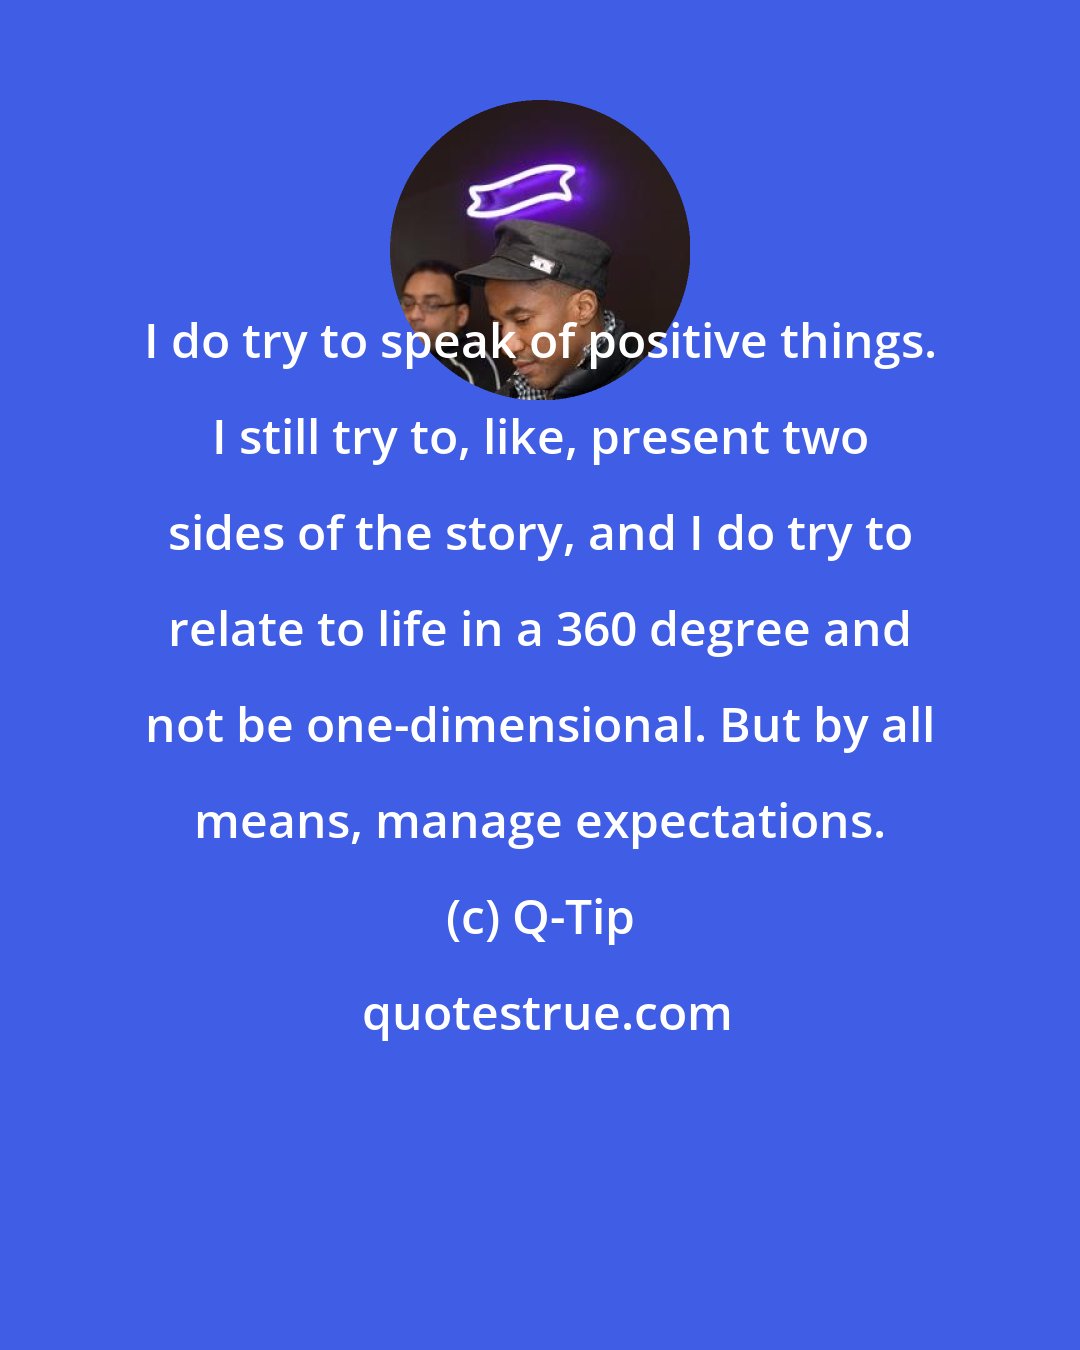 Q-Tip: I do try to speak of positive things. I still try to, like, present two sides of the story, and I do try to relate to life in a 360 degree and not be one-dimensional. But by all means, manage expectations.